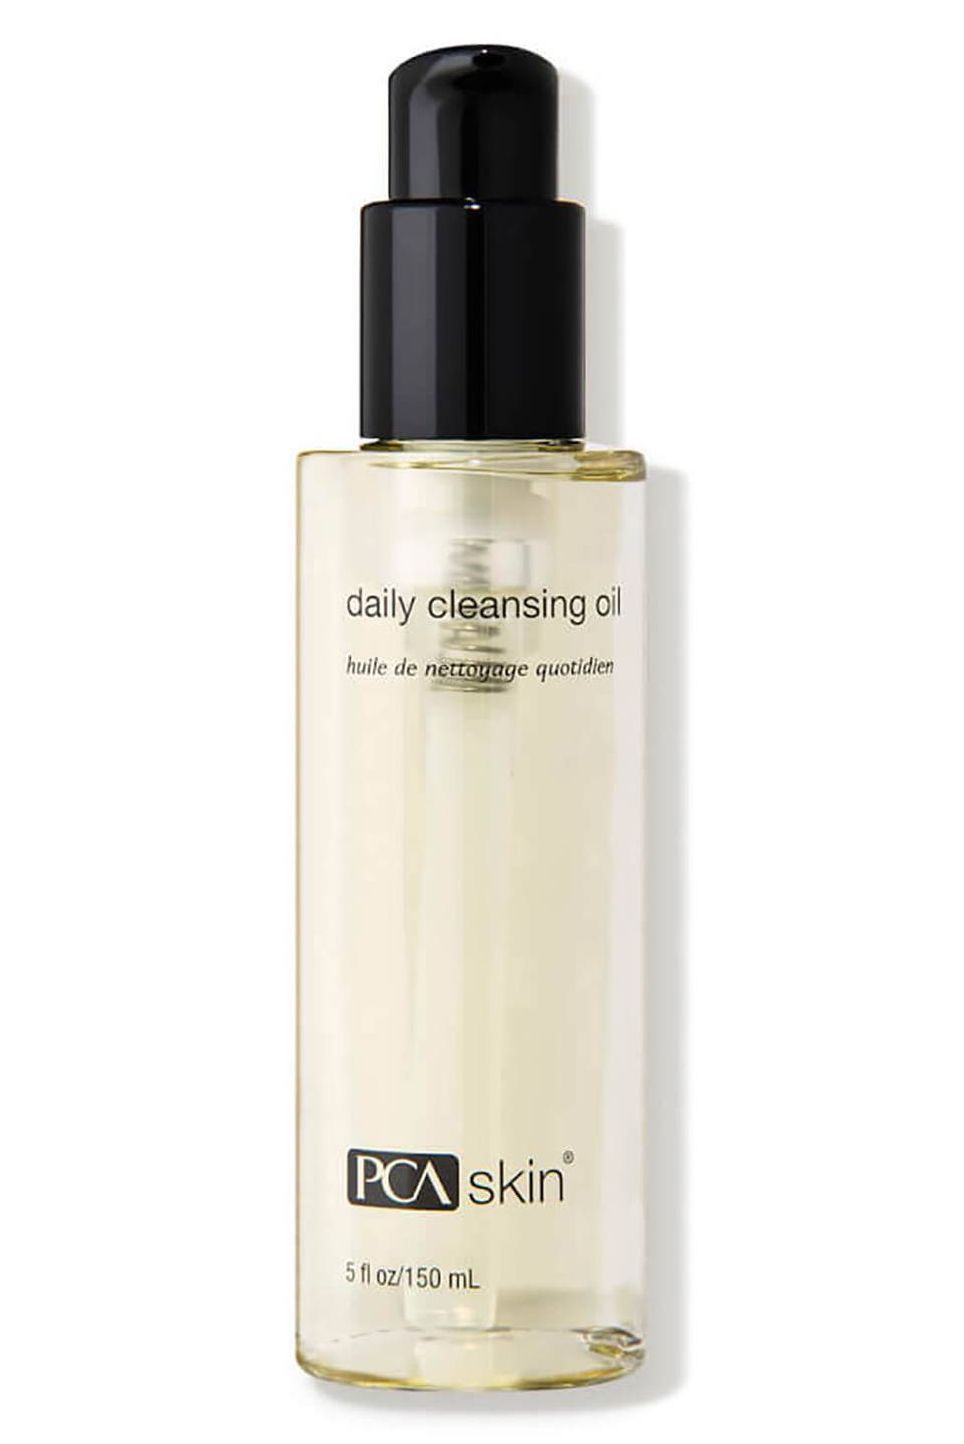 PCA SKIN Daily Cleansing Oil